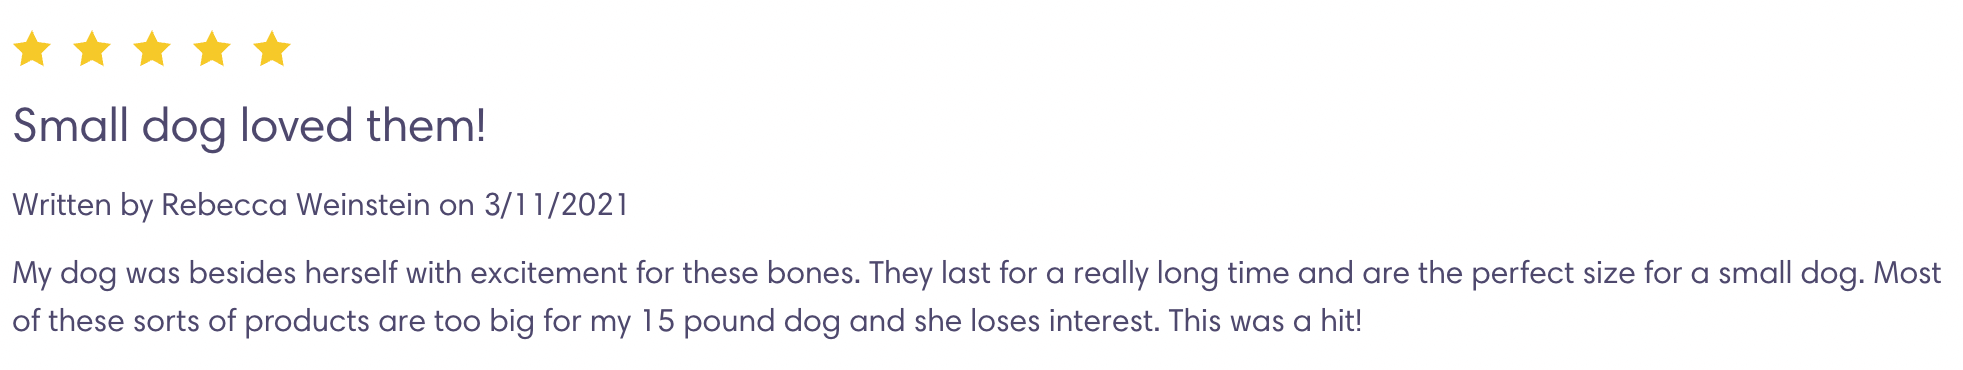 Dog Bones for Puppies - 5 Star Review